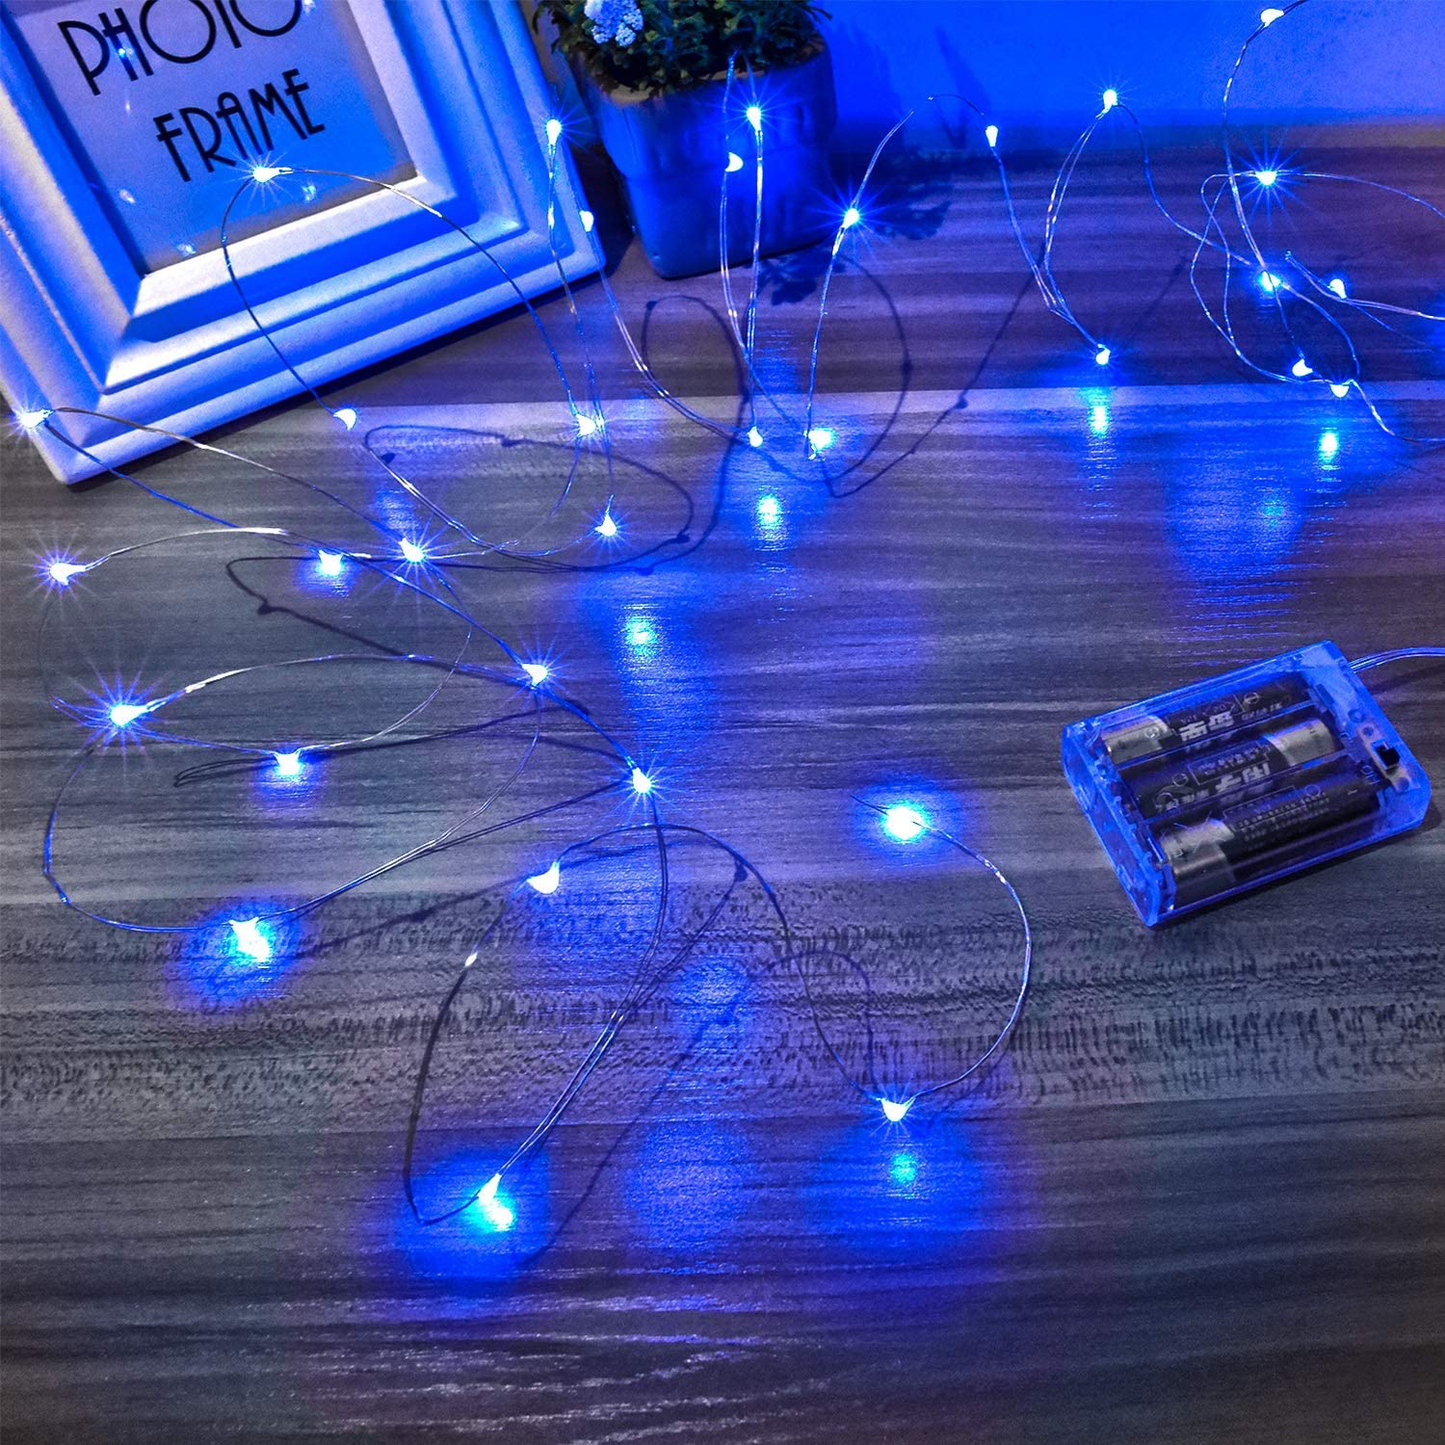 Ariceleo Led Fairy Lights Battery Operated, 1 Pack Mini Battery Powered Copper Wire Starry Fairy Lights for Bedroom, Christmas, Parties, Wedding, Centerpiece, Decoration (5m/16ft Multi-Colored)